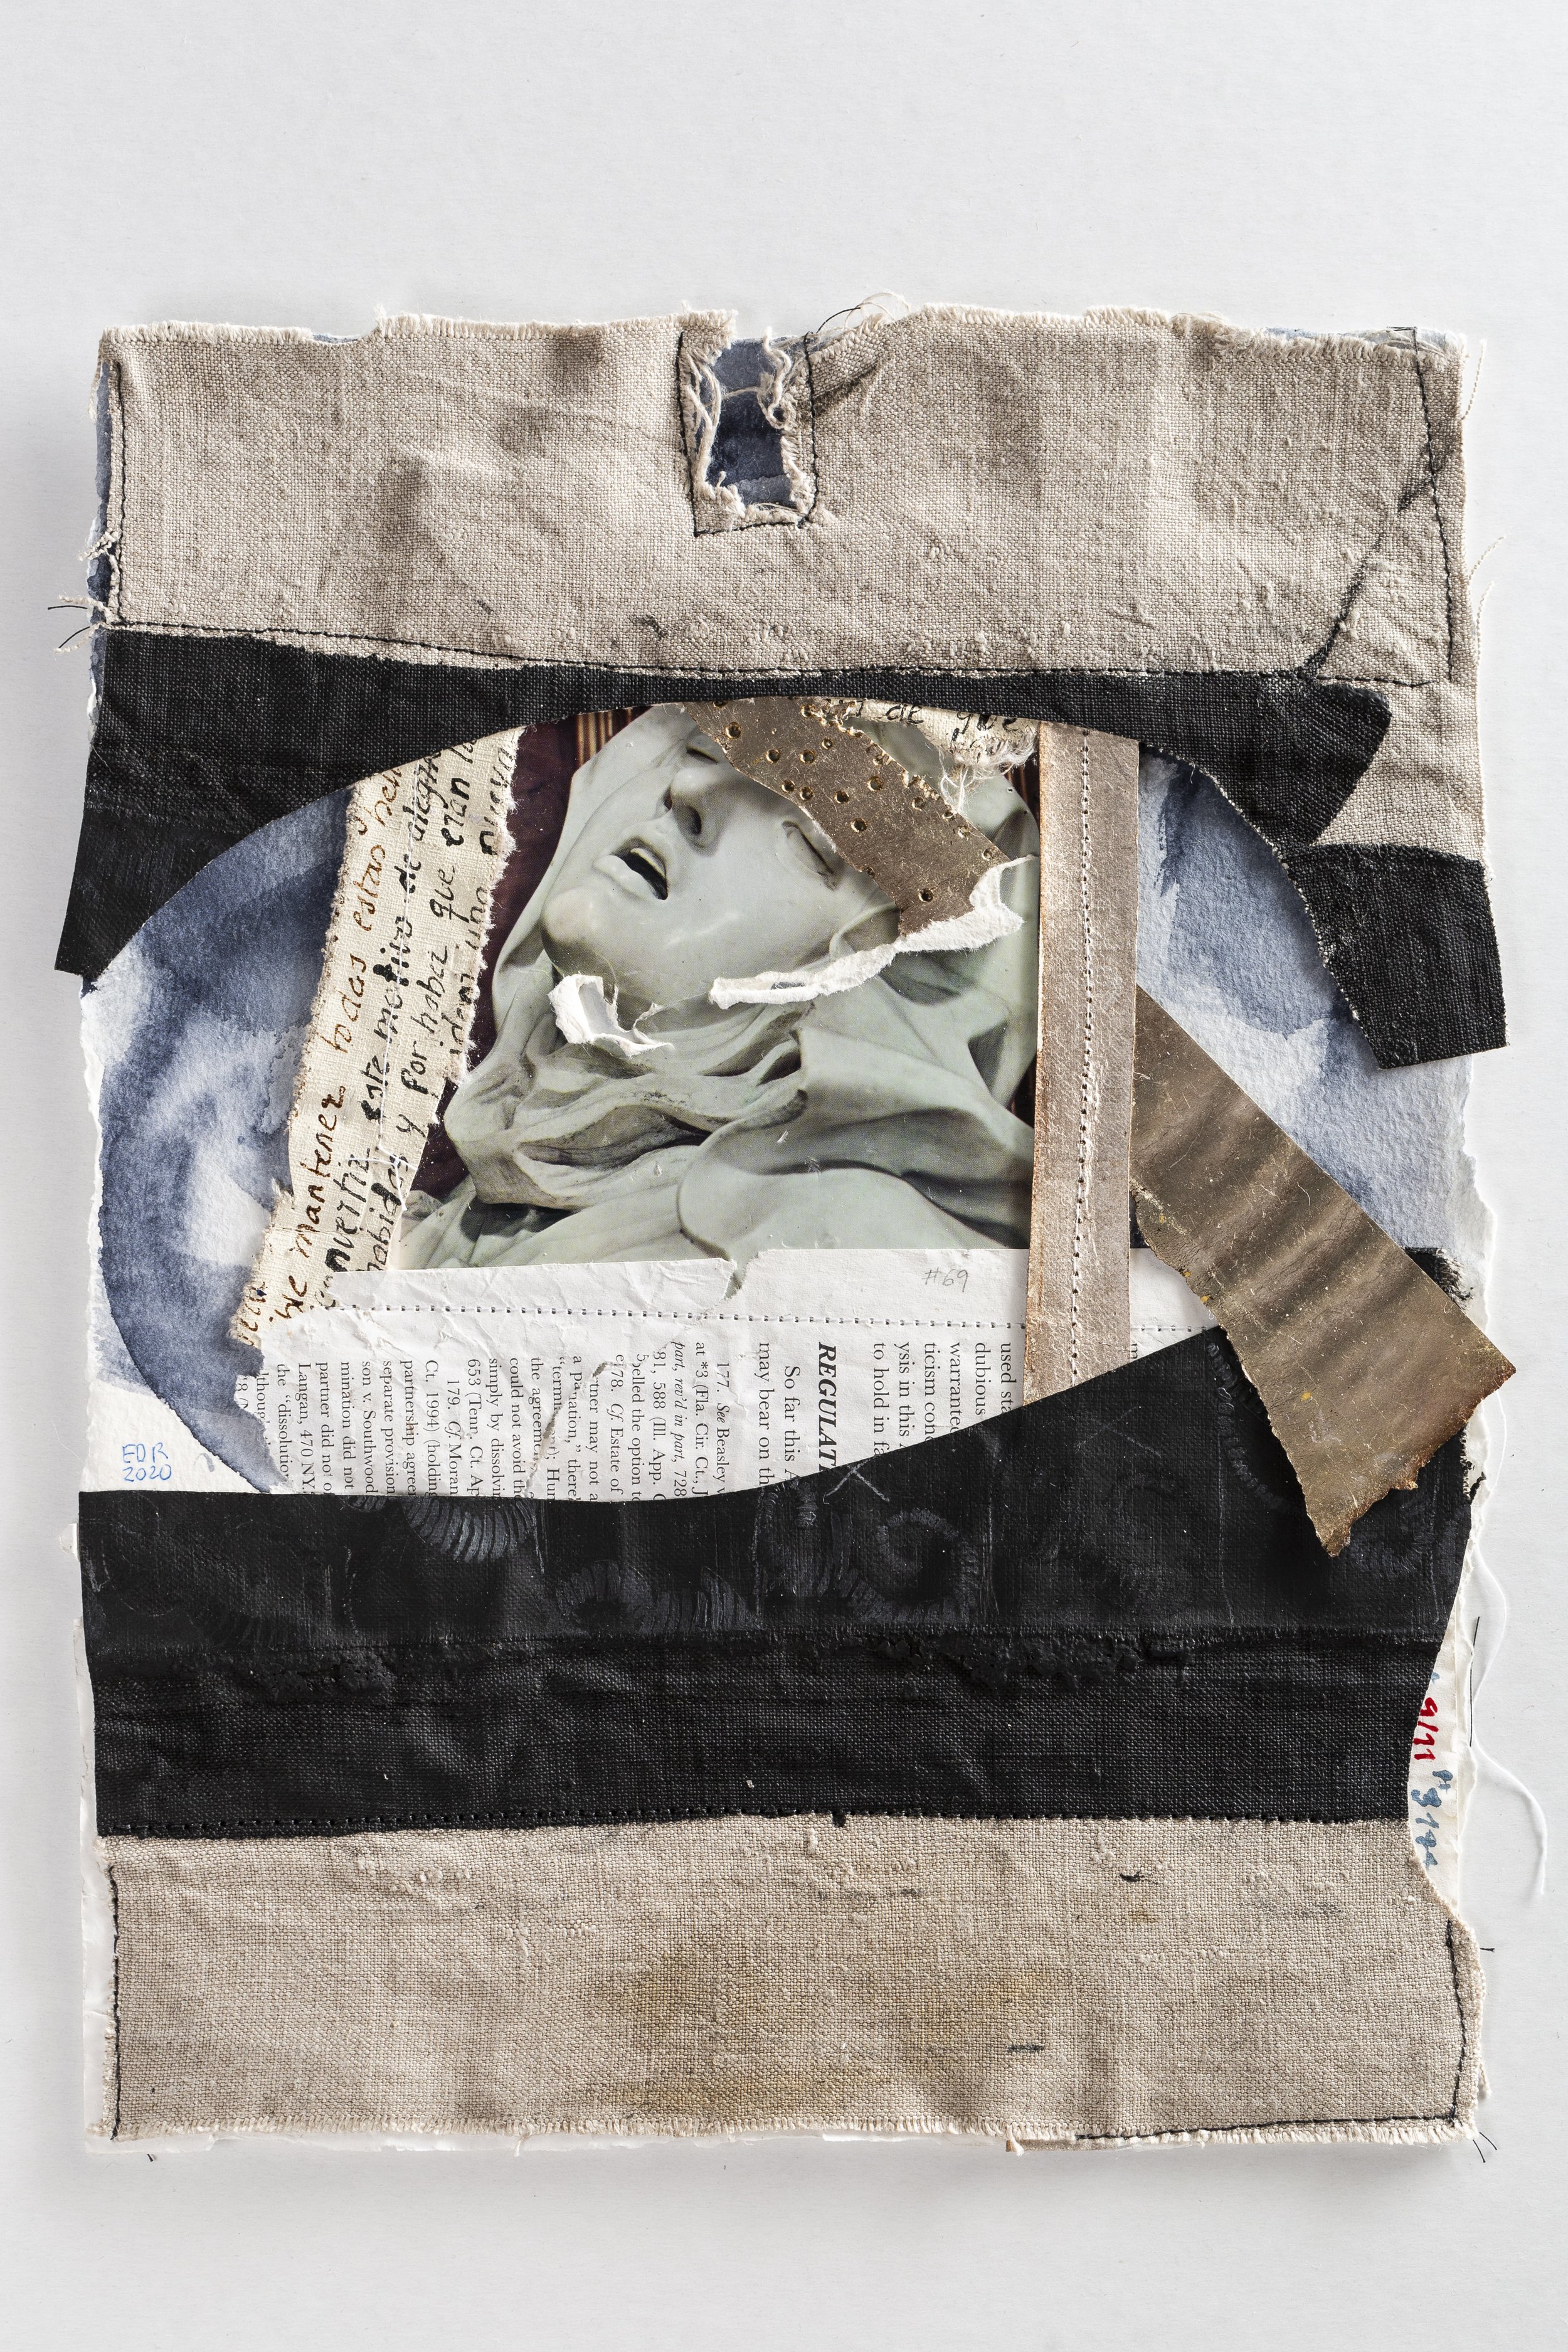  Memory I, #69  2020   9/11 and Sandy salvaged fragments of oil on primed linen, silver leaf on primed linen, ink on primed linen, stitching, 9/11 damaged postcard, Bernini’s Ecstasy of Santa Teresa, Chiesa Della Vitoria, Rome, 9/11 found fragments o